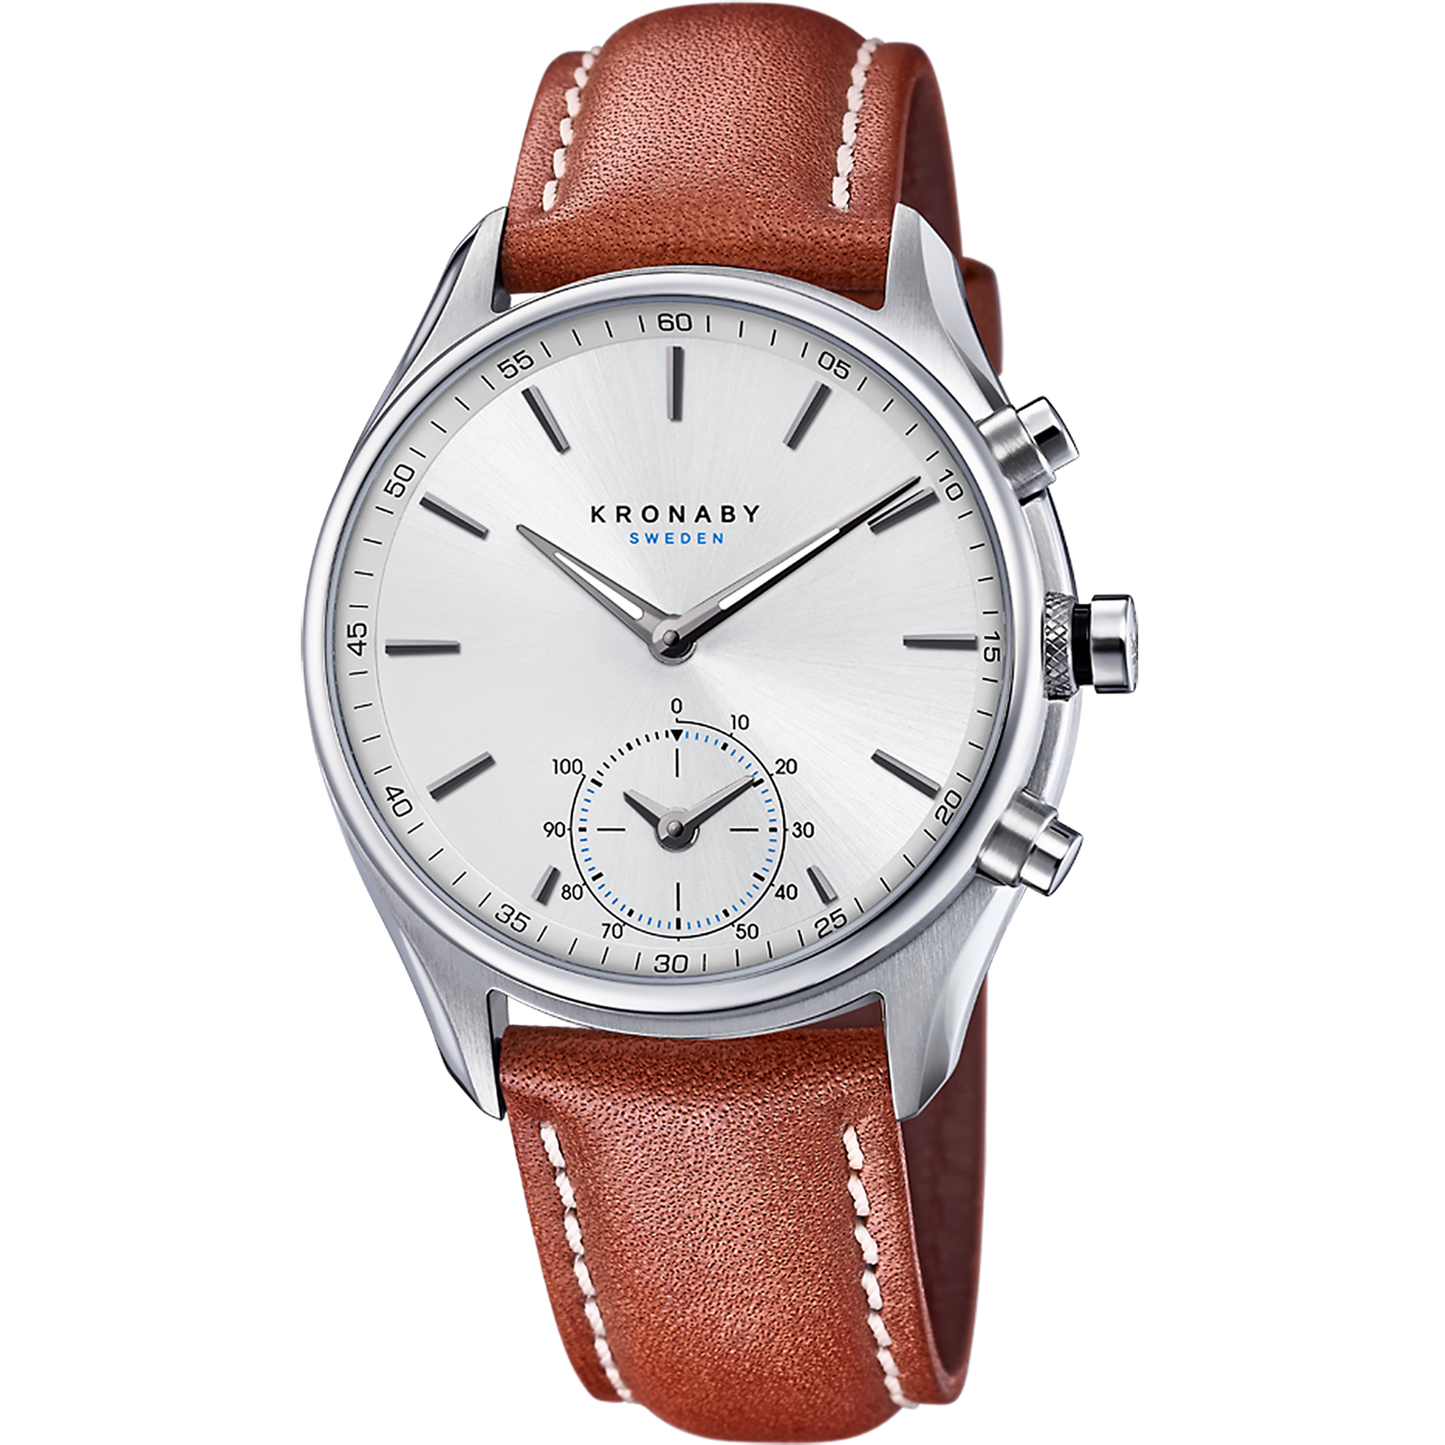 Kronaby Sekel S3781-5 - Leather - Strap Color: Brown - Strap Size: 22 mm - Case Size: 43 mm